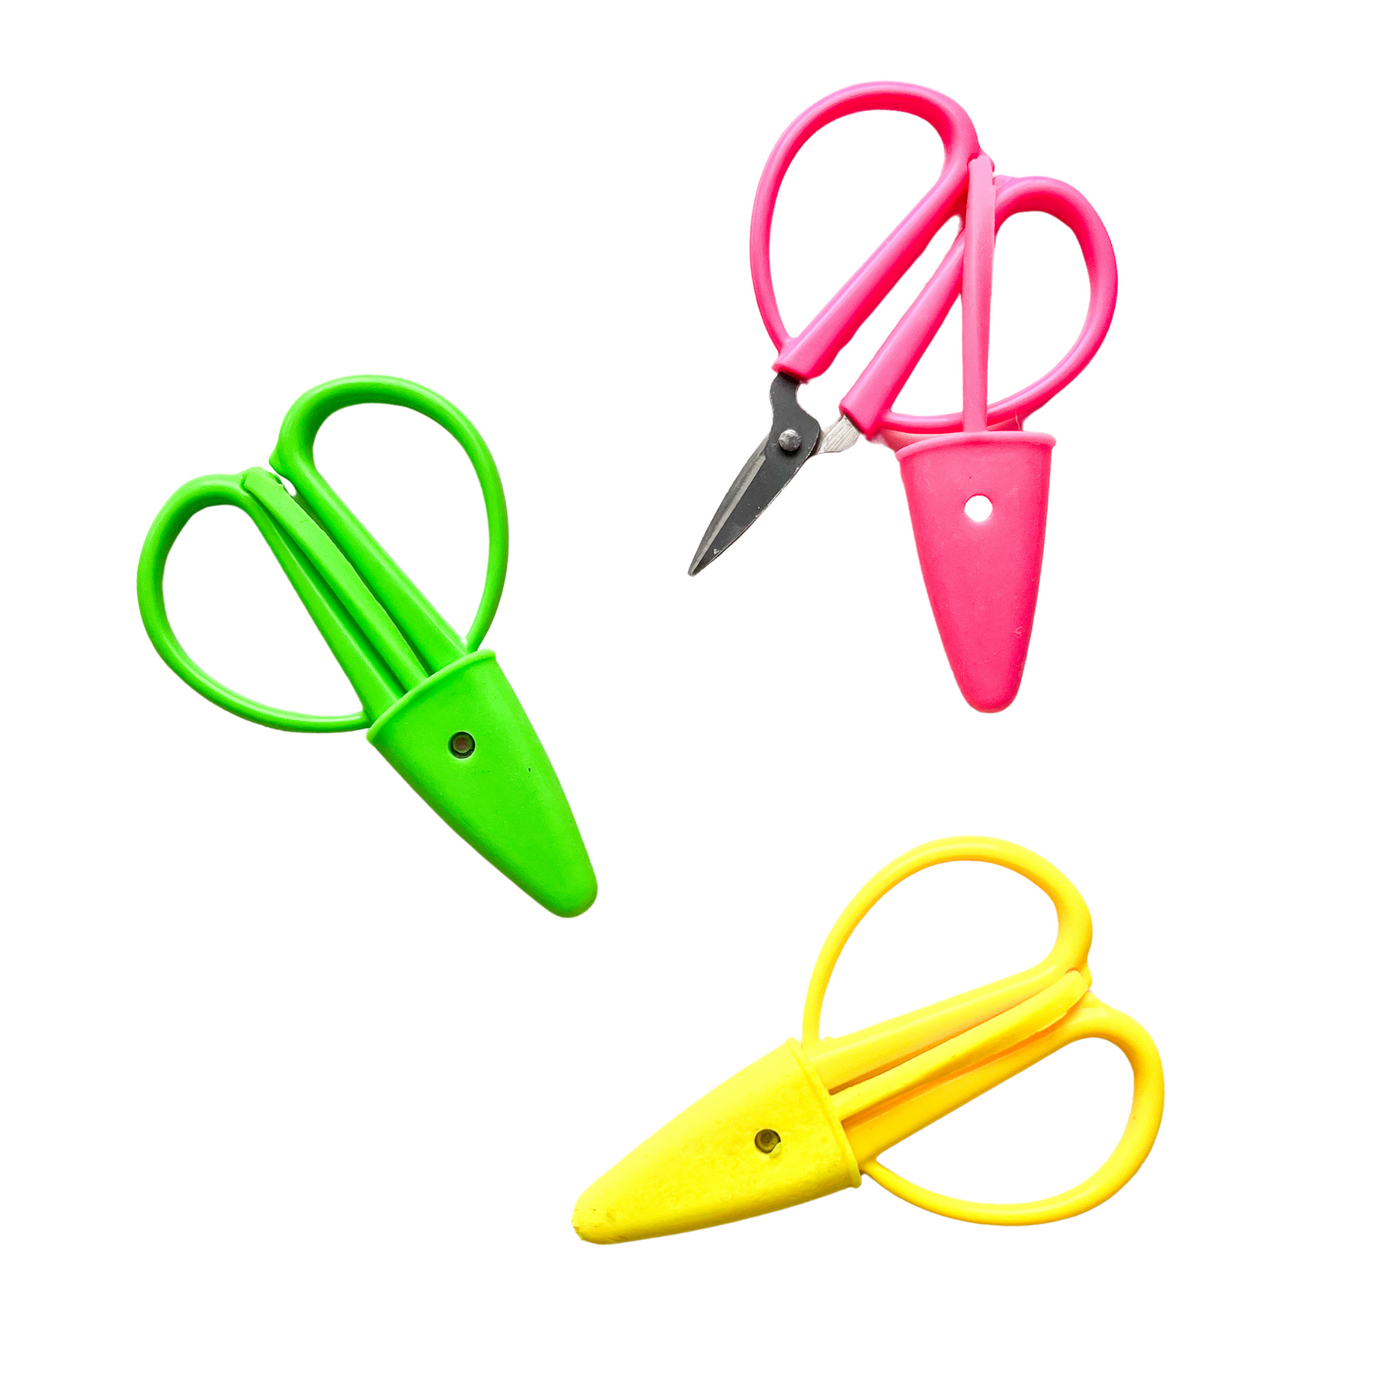 3 pairs of mini scissors. One in neon pink, one neon green, and one yellow.